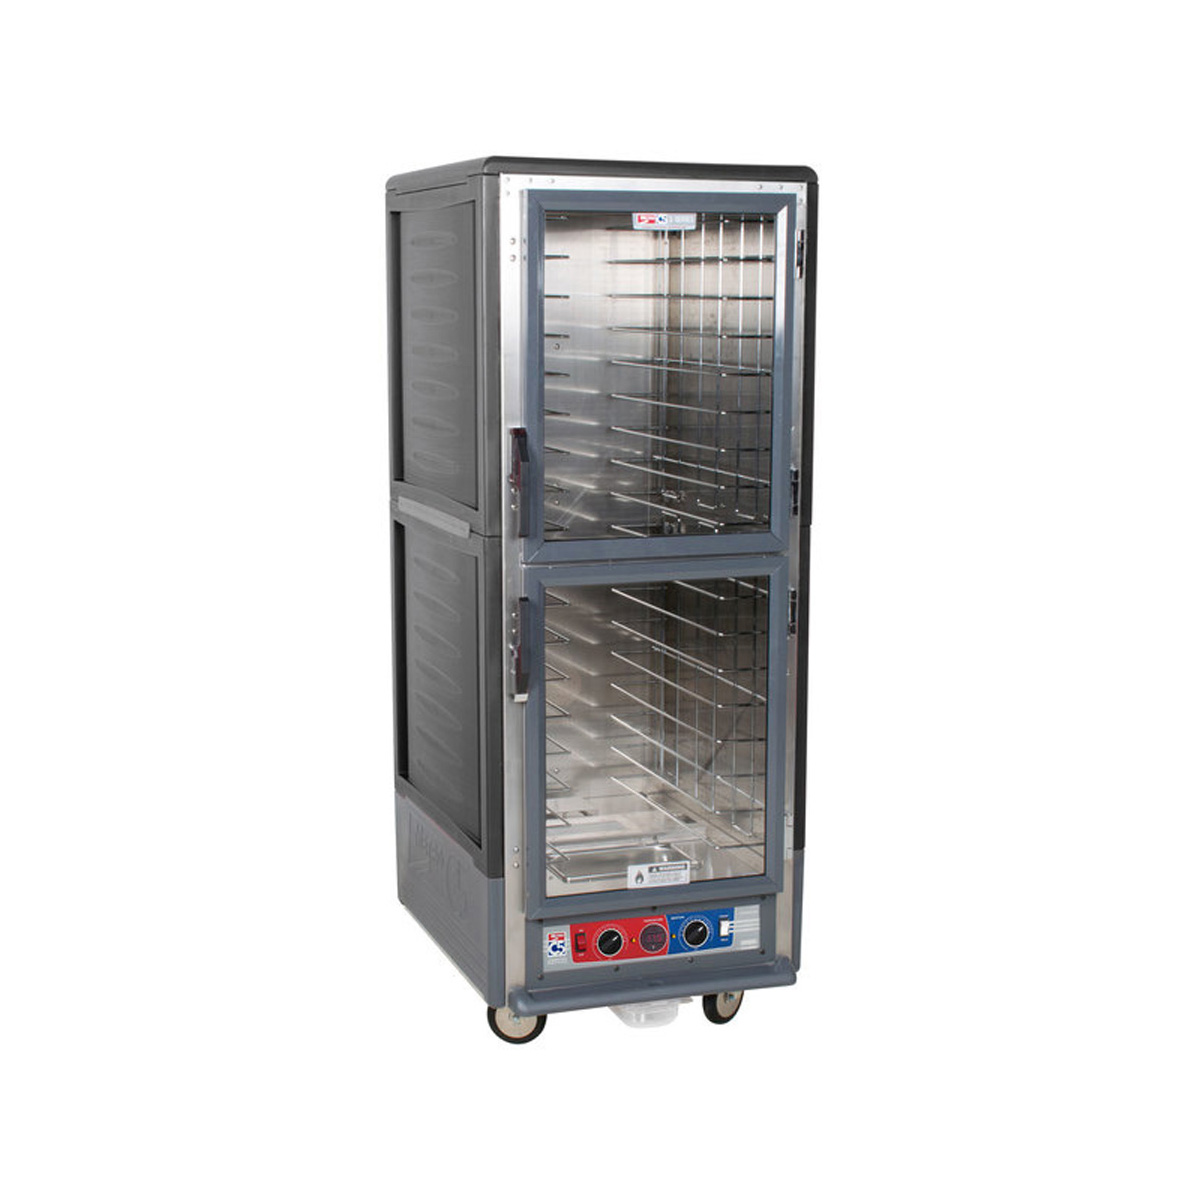 Metro C539-CLDC-4-GYA C5 3 Series Mobile Heated Proofing and Holding Cabinet